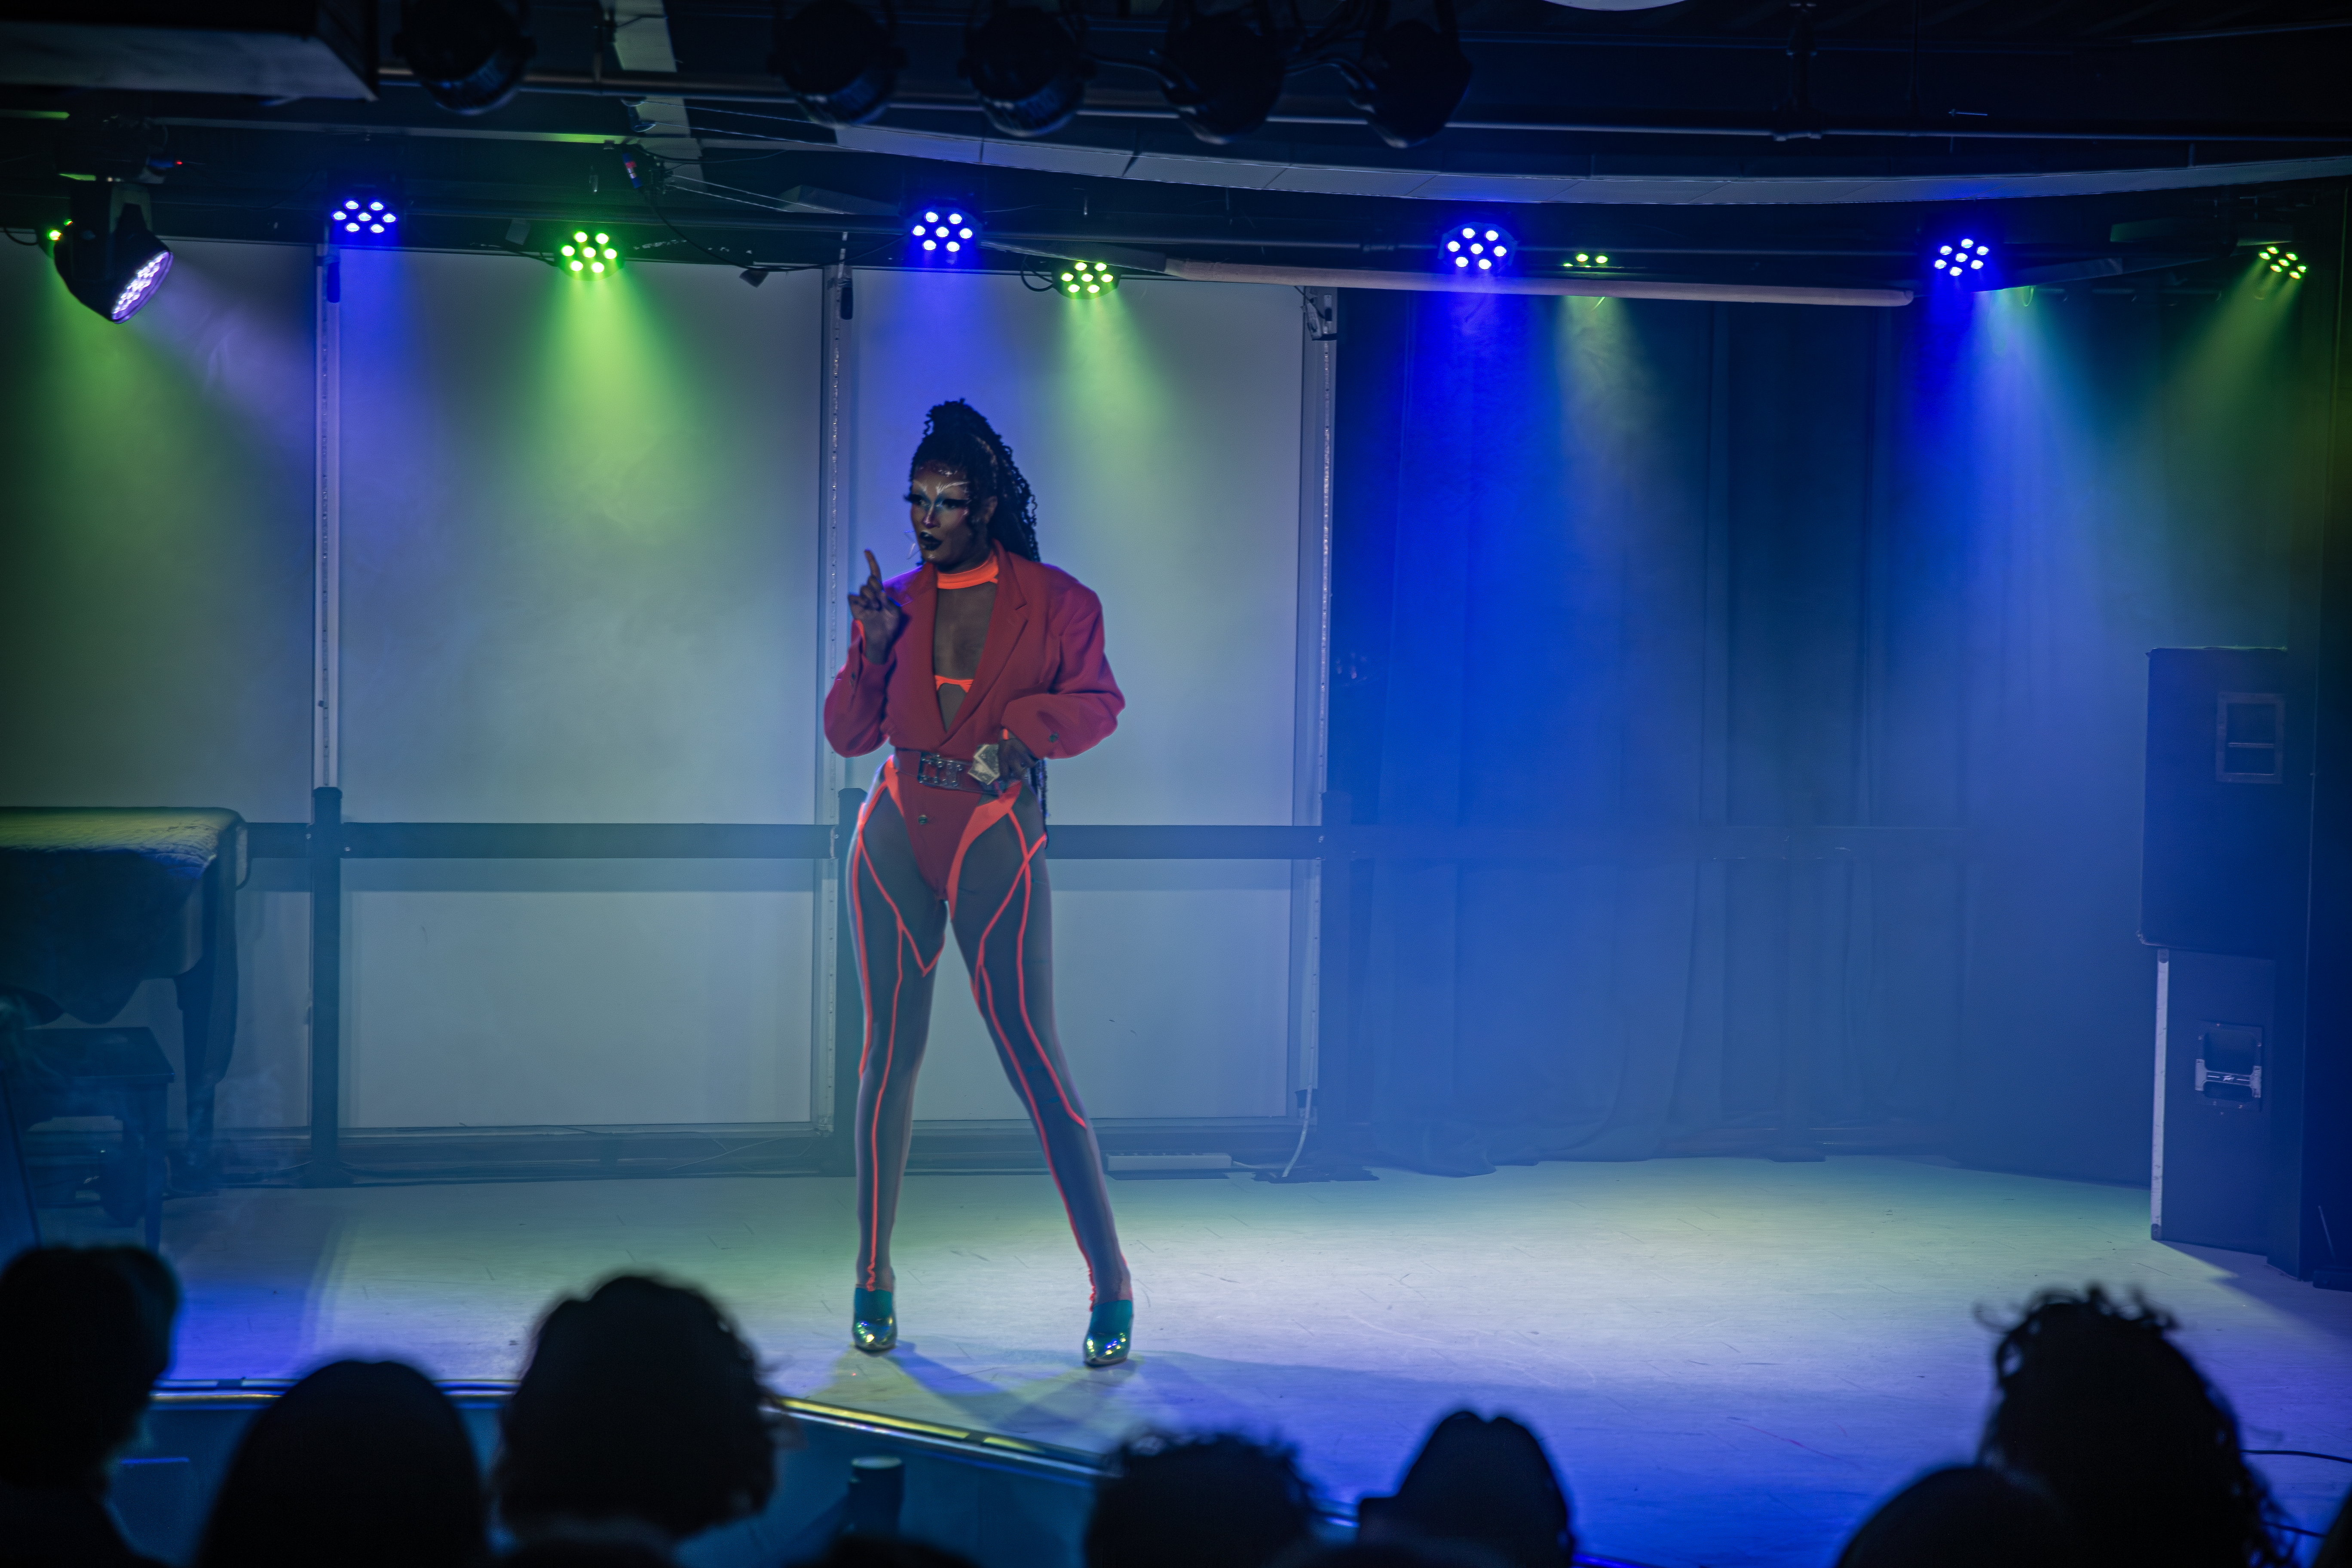 A drag performer wearing neon orange and red speaks to the audience